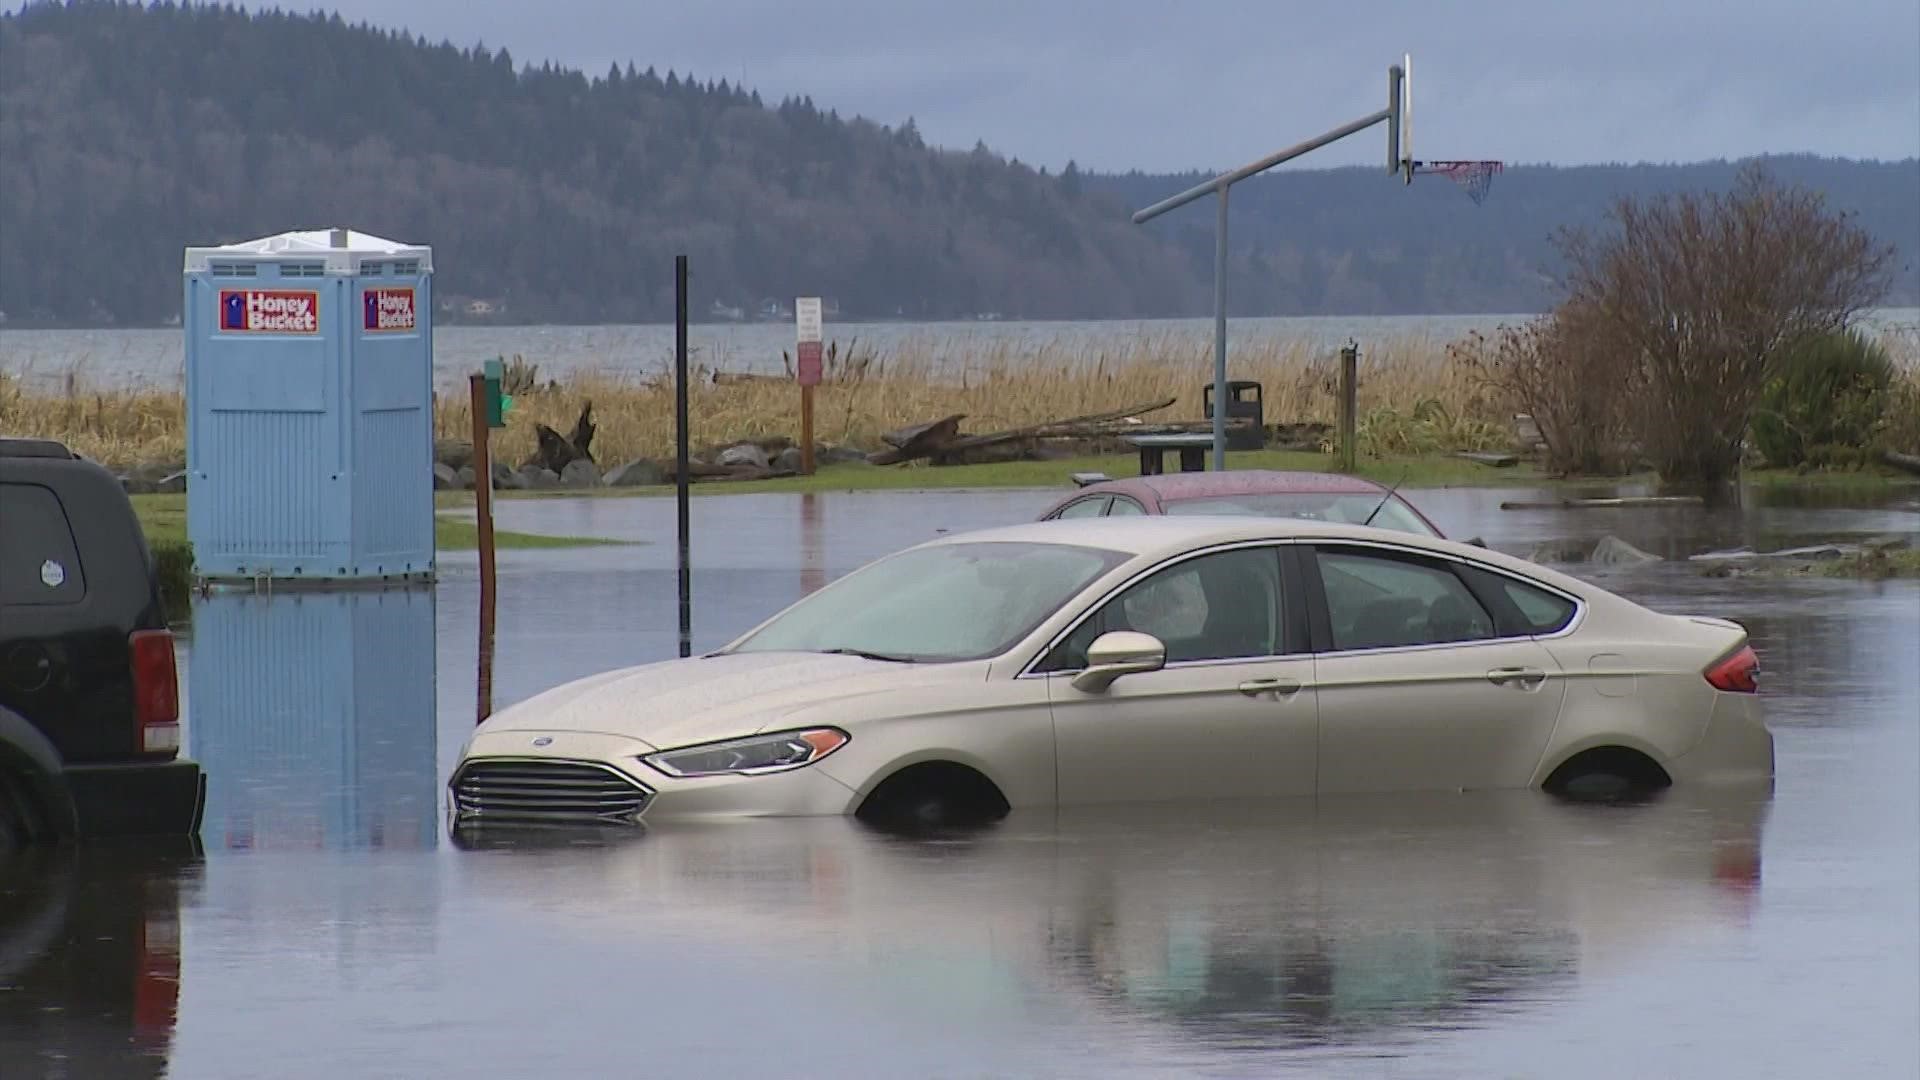 The King tide, plus a low pressure system, caused flooding along the central and south sound yesterday.